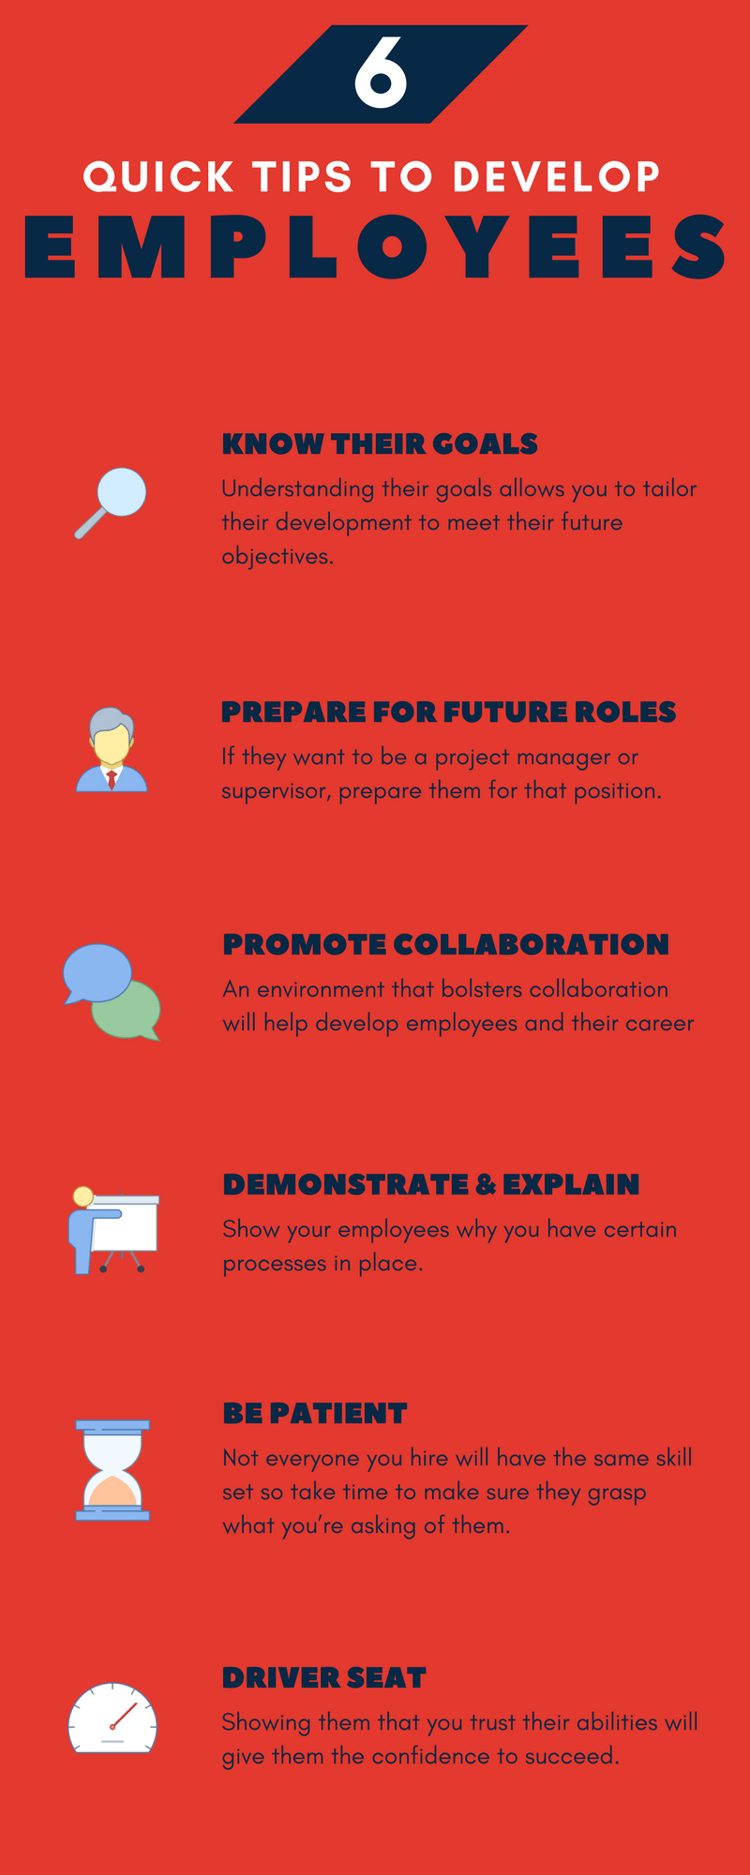 6 Quick Tips to Develop Employees.png